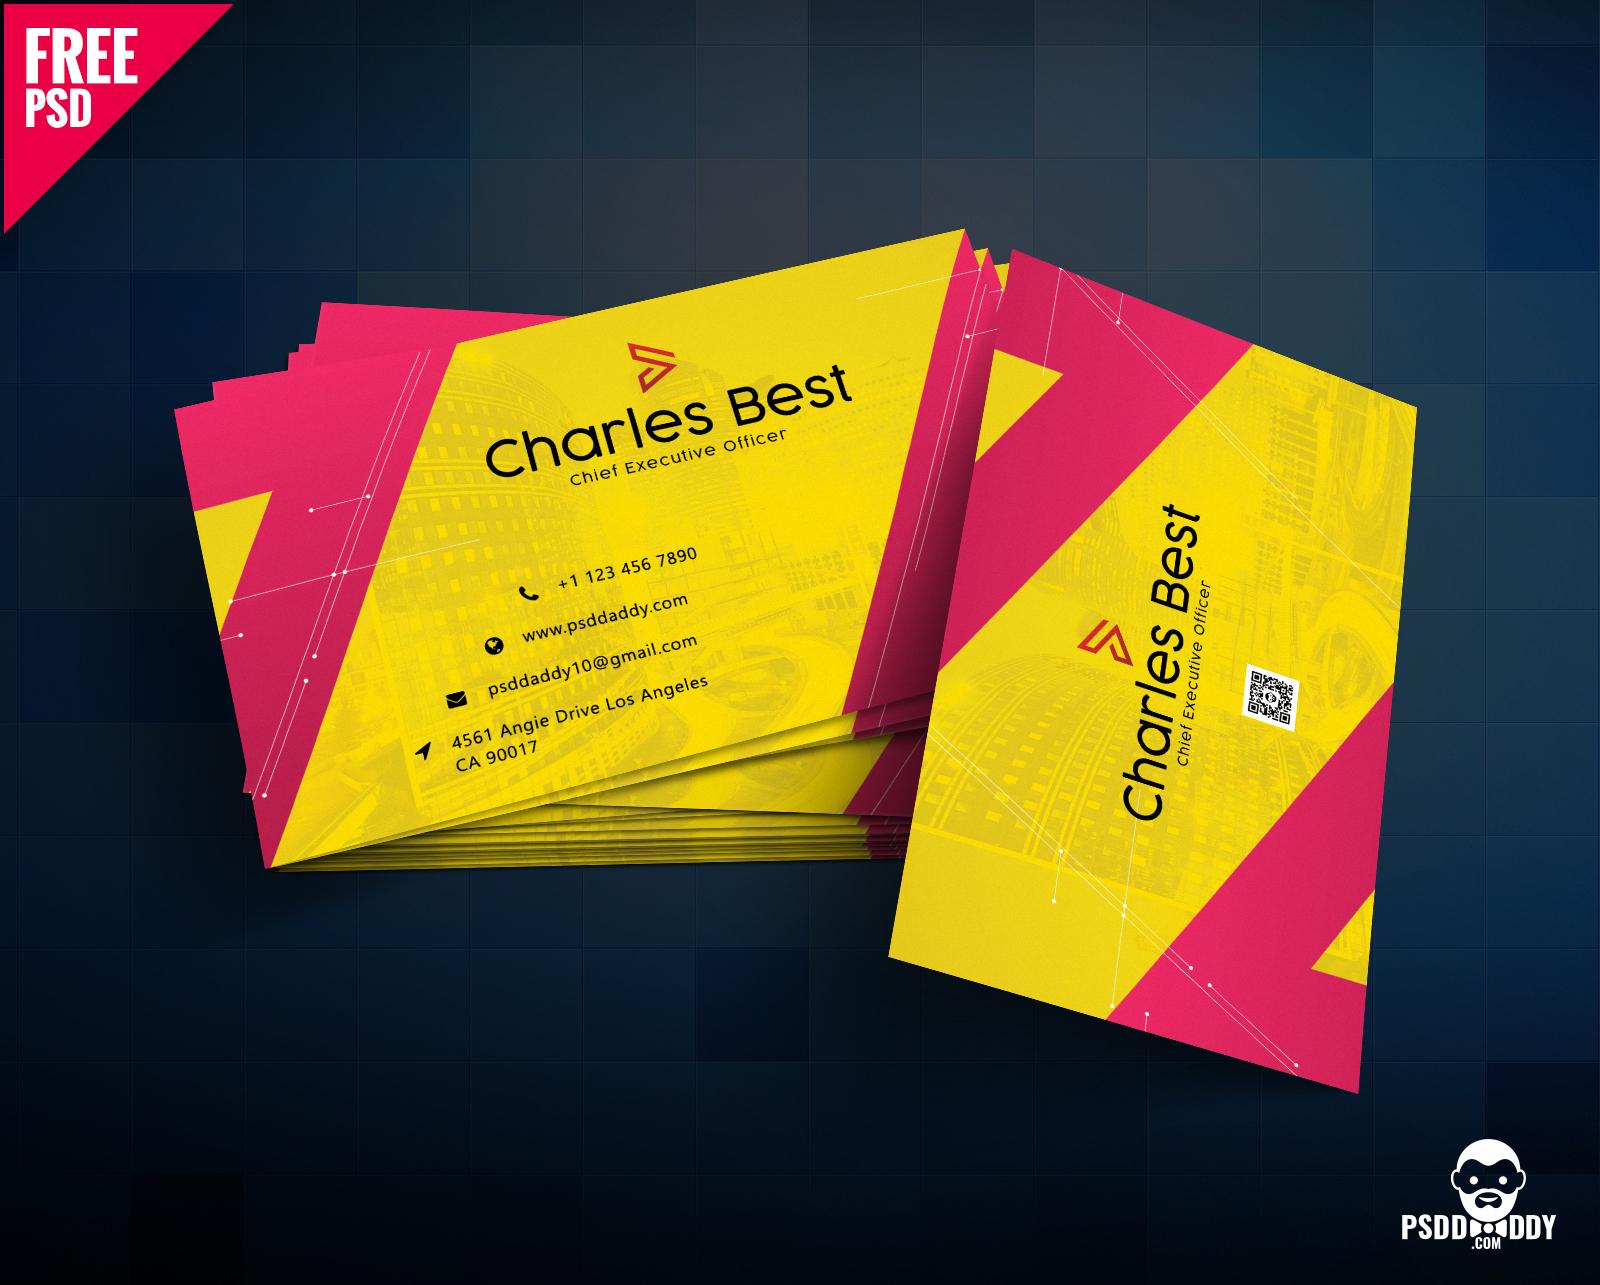 Download] Creative Business Card Free Psd | Psddaddy With Regard To Calling Card Template Psd